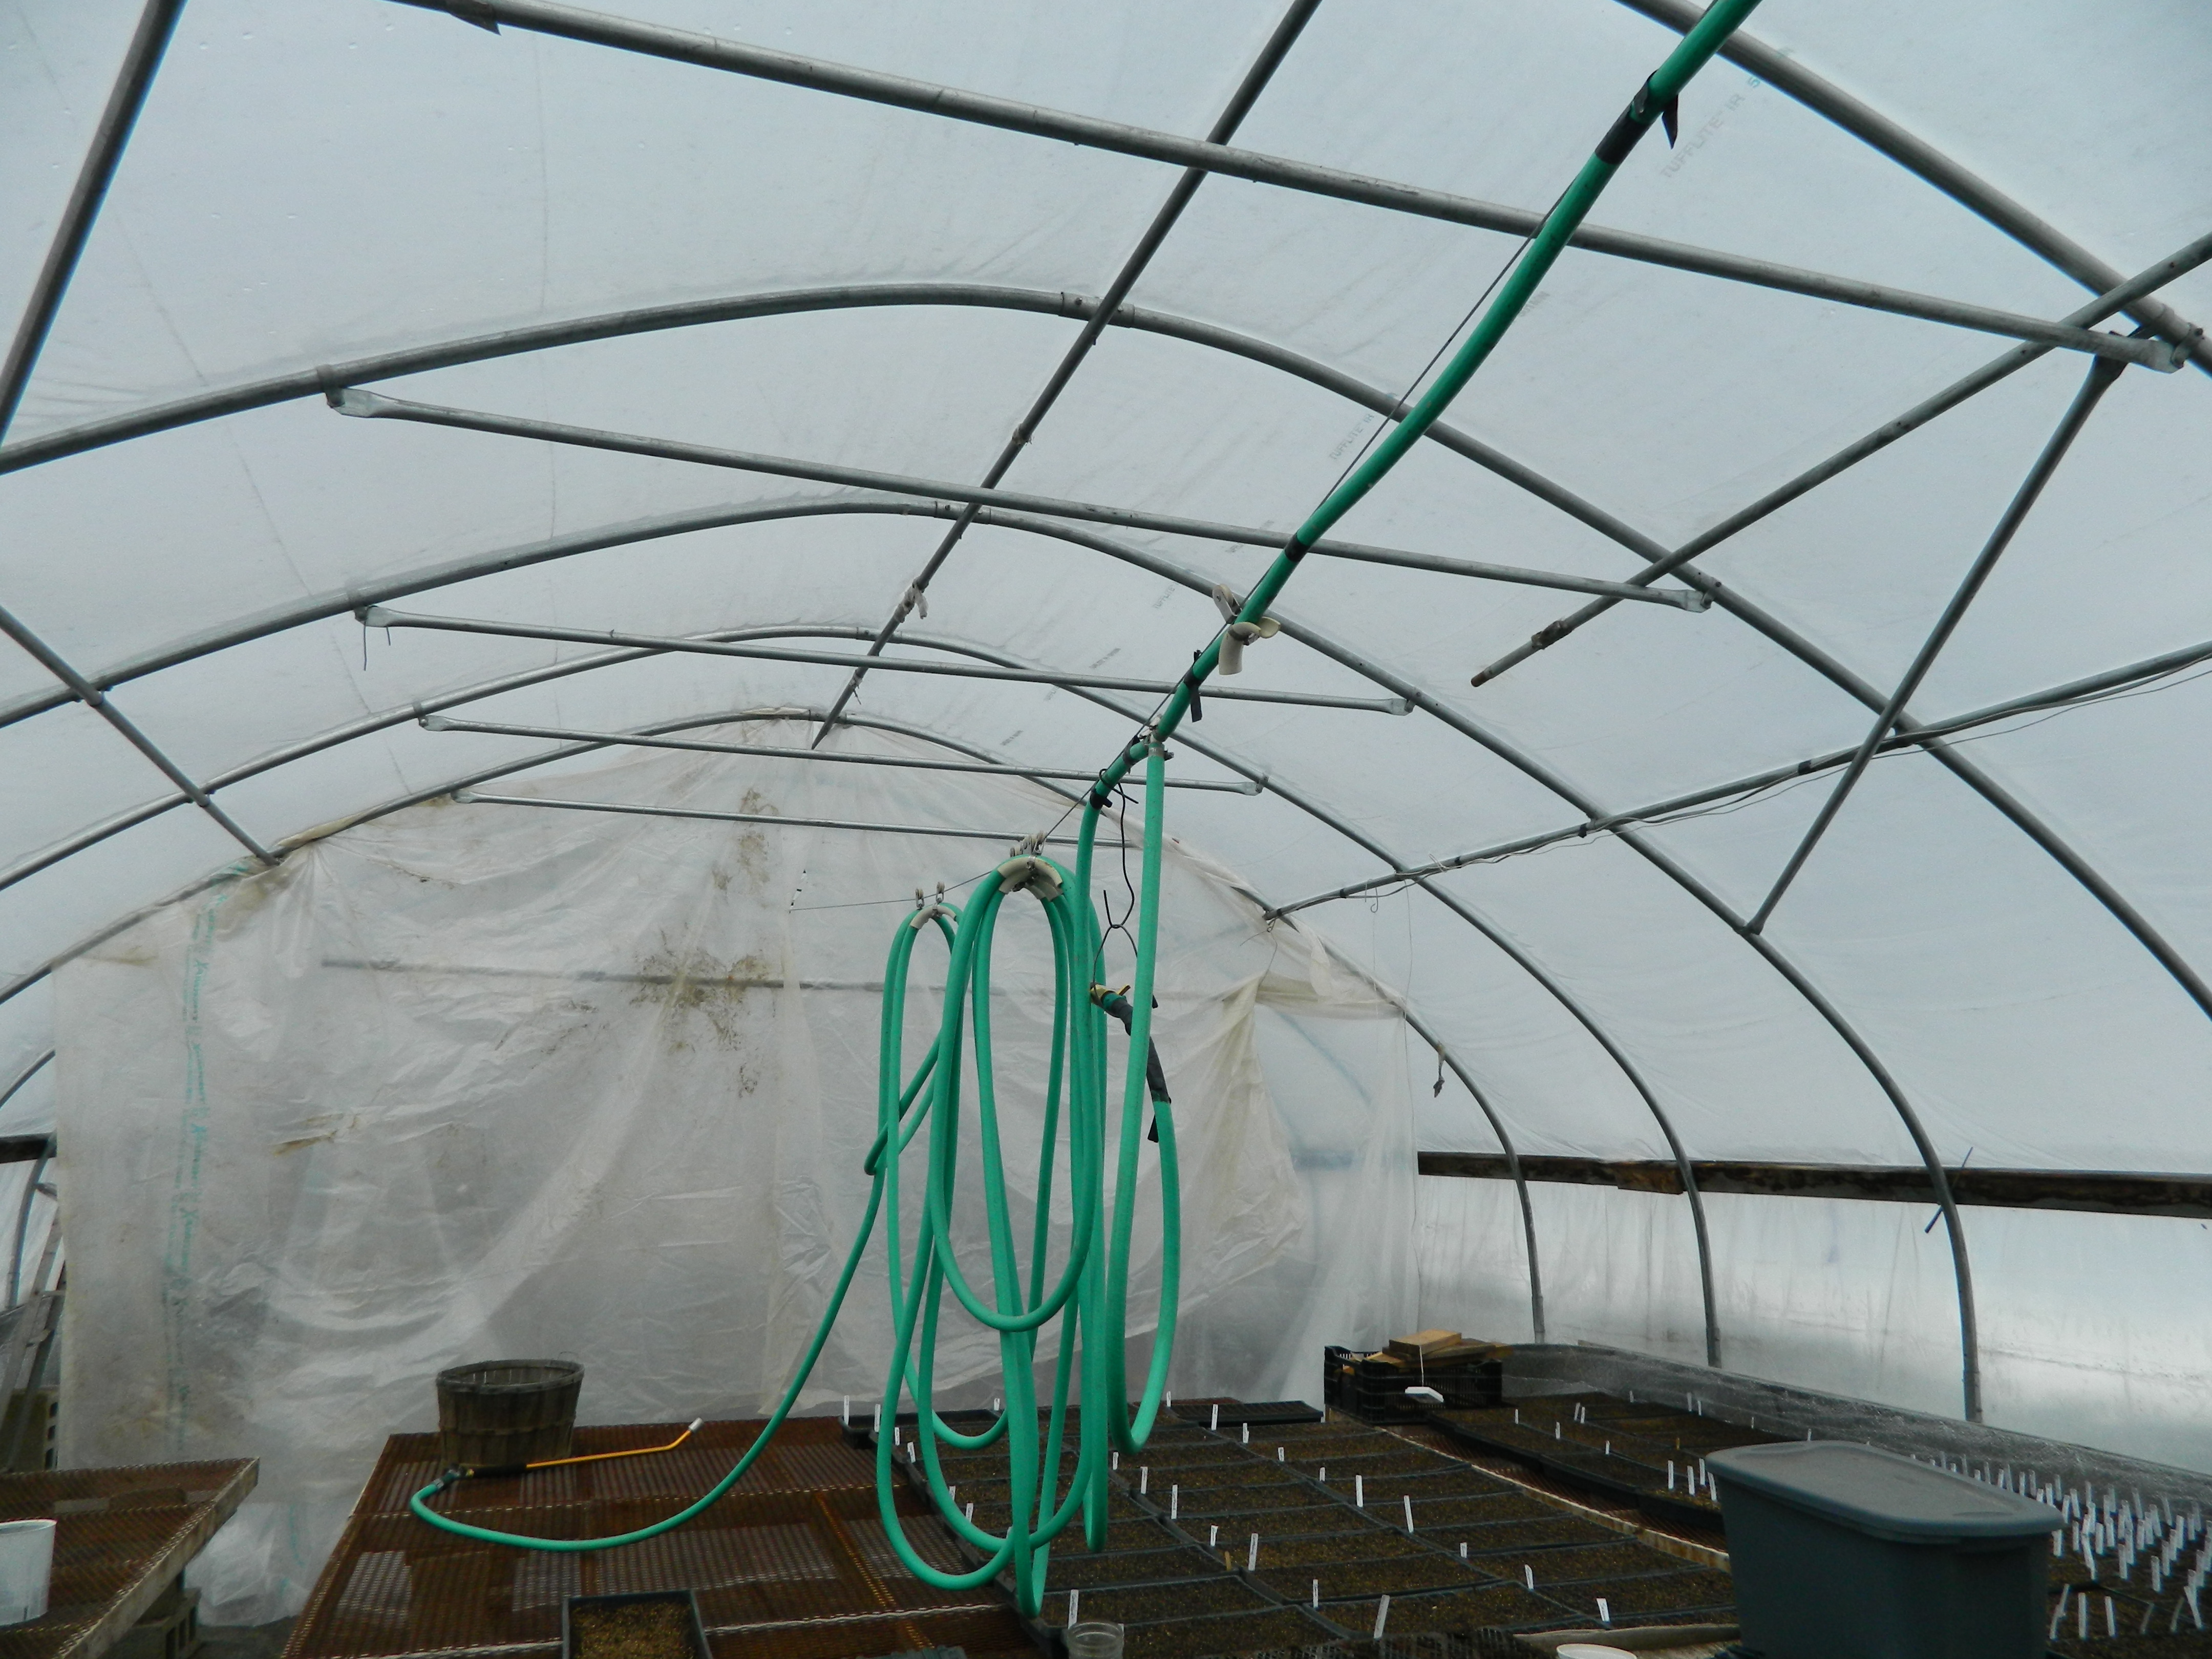 Hanging Hoses – UVM Extension Ag Engineering